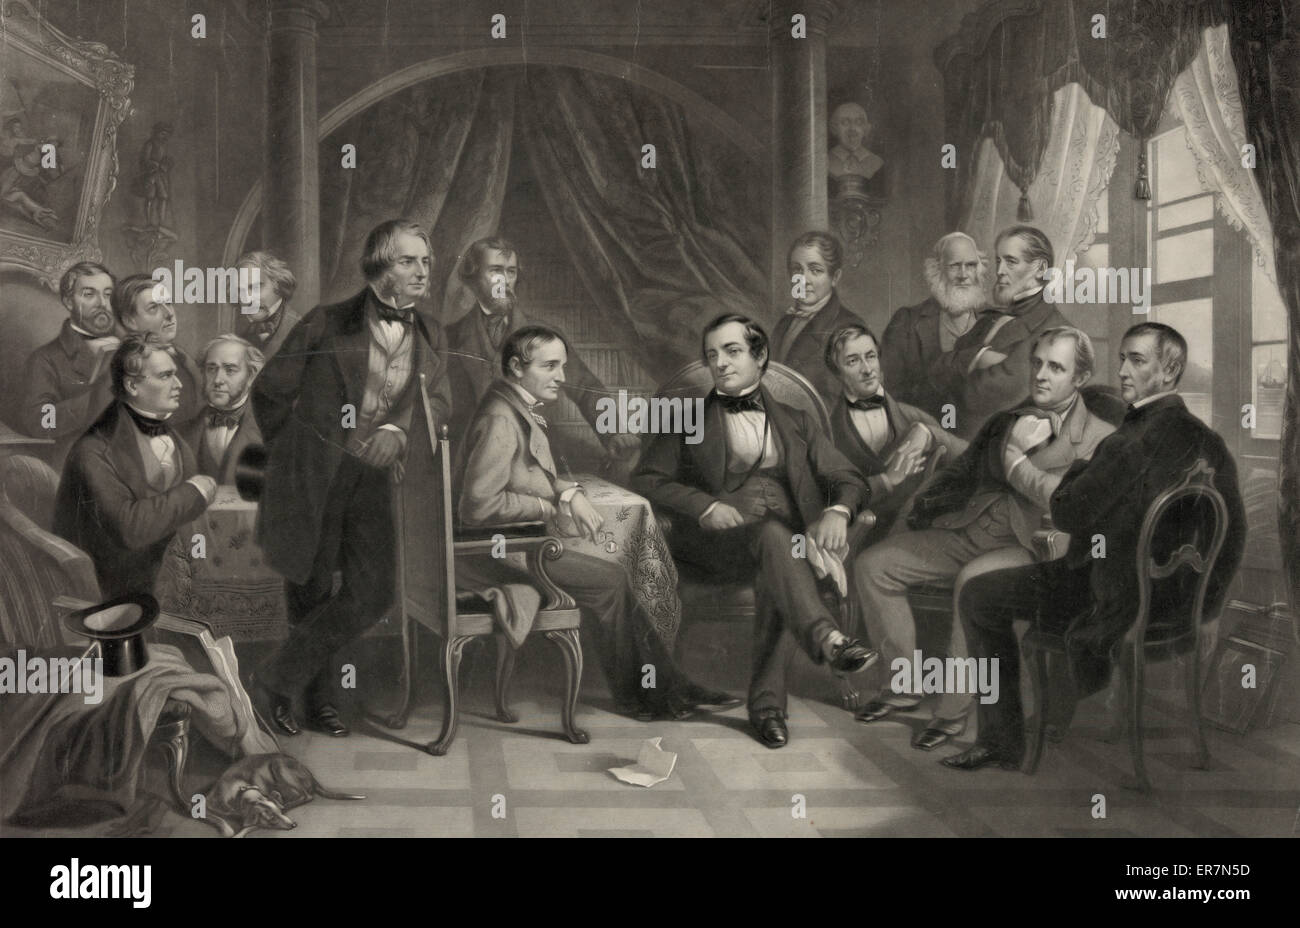 Washington Irving and his literary friends at Sunnyside. Date 1864. Southern District of N.Y. Stock Photo